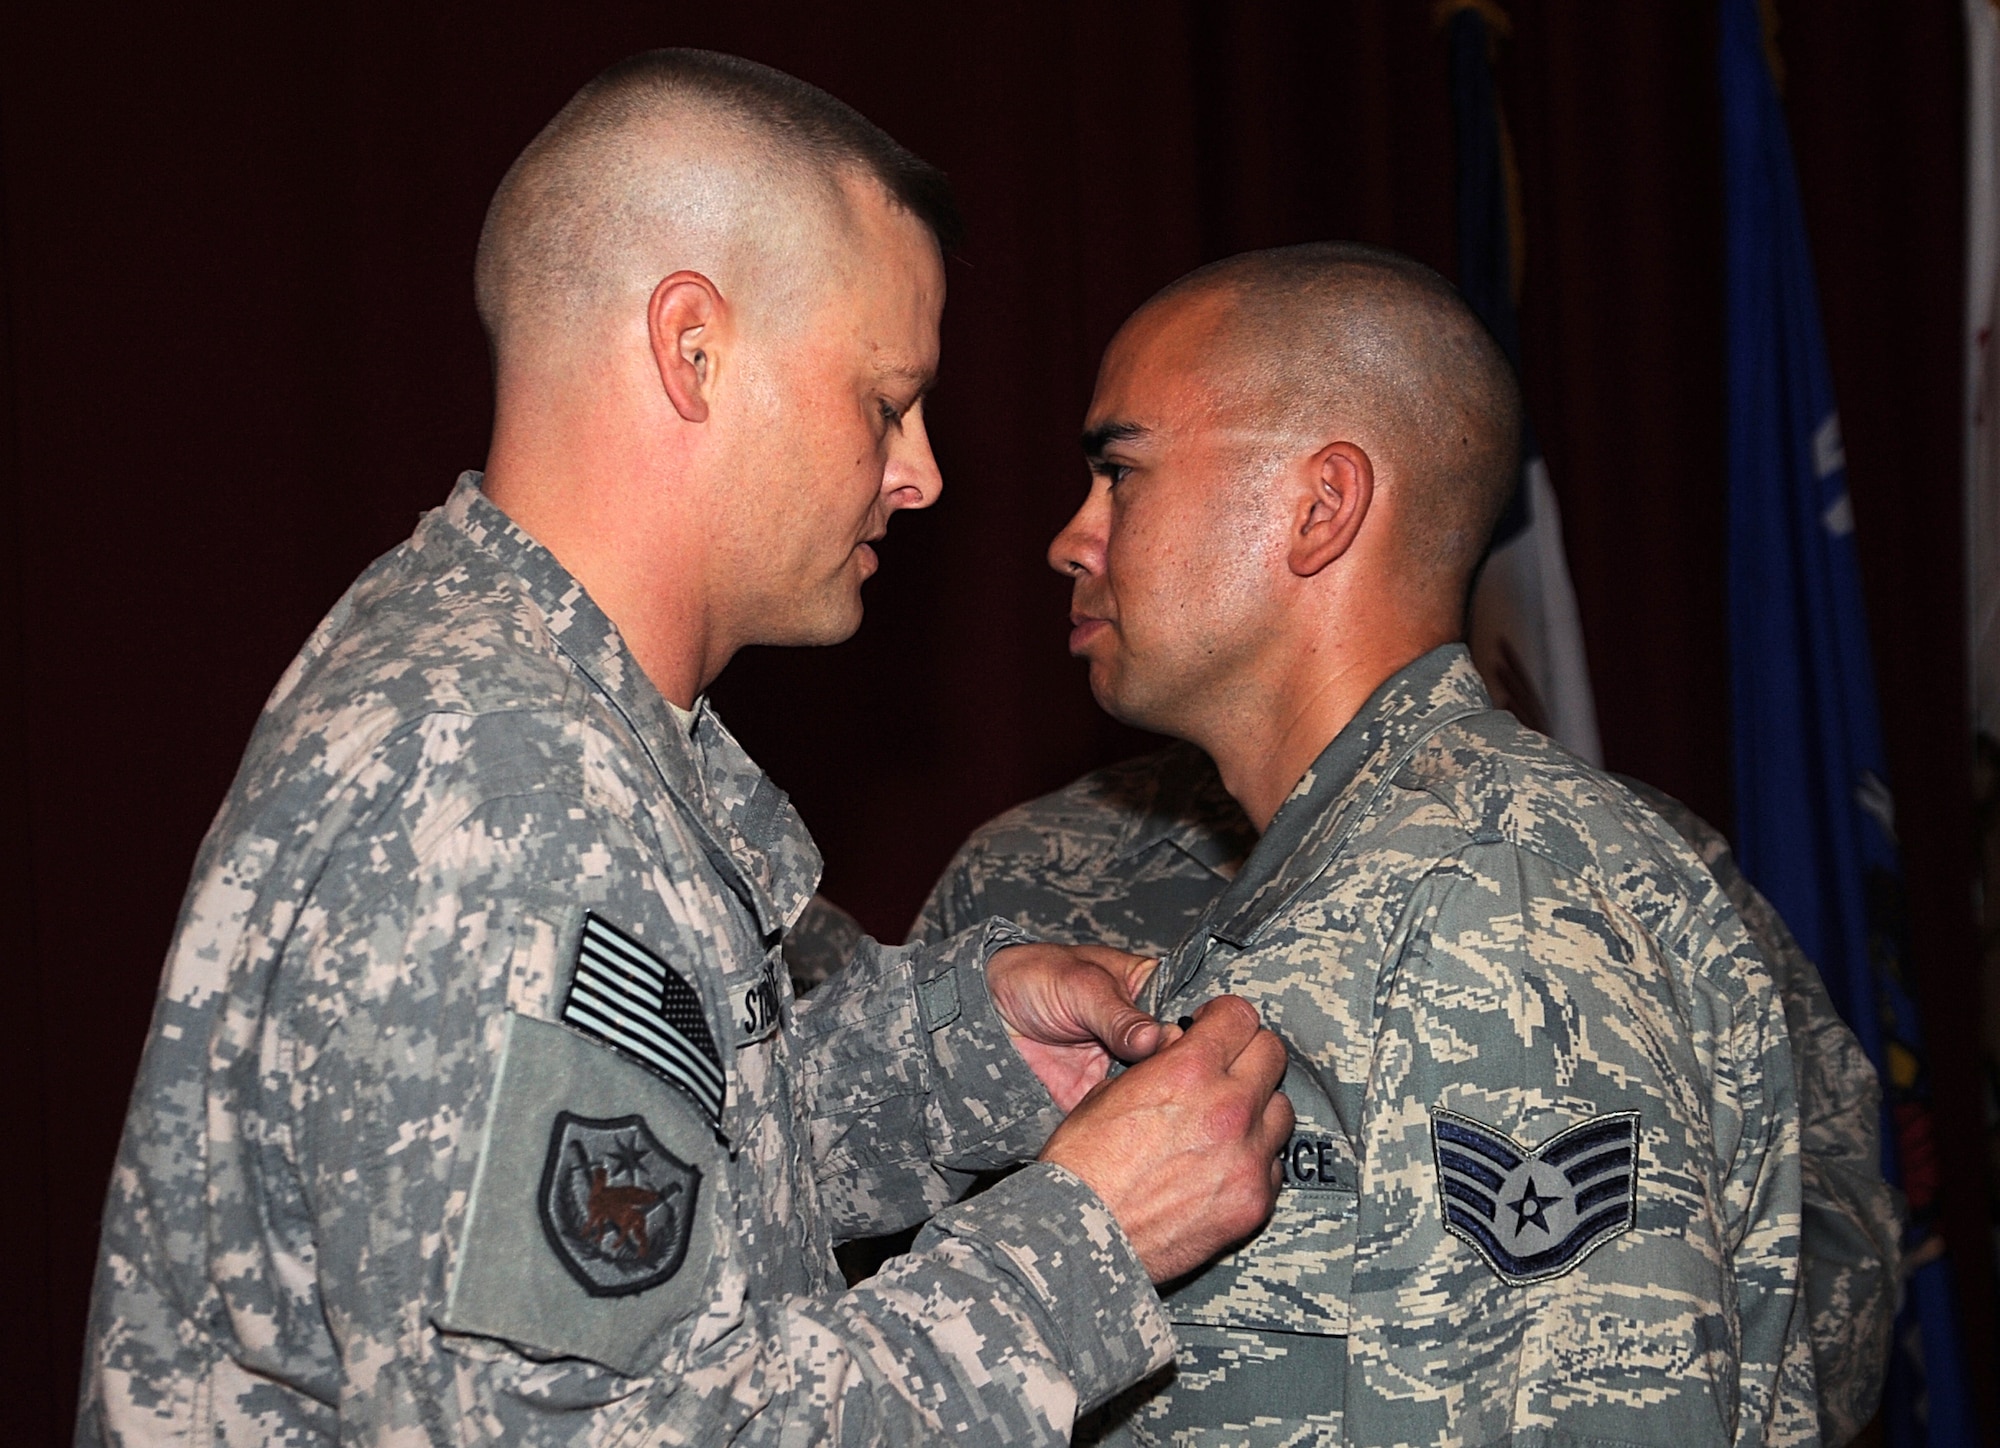 Air Force Staff Sgt. Lance Atkinson, right, receives the U.S. Army Combat Action Badge during an official ceremony in Southwest Asia June 9. Sergeant Atkinson is a combat trucker with the 387th Expeditionary Logistics Readiness Squadron. Sergeant Atkinson's vehicle was struck by an improvised explosive device while on a convoy in Iraq as part of the Joint Logistics Task Force 6, 70th Medium Truck Detachment in direct support of Operations New Dawn and Iraqi Freedom. (U.S. Air Force photo by Senior Airman Cynthia Spalding)